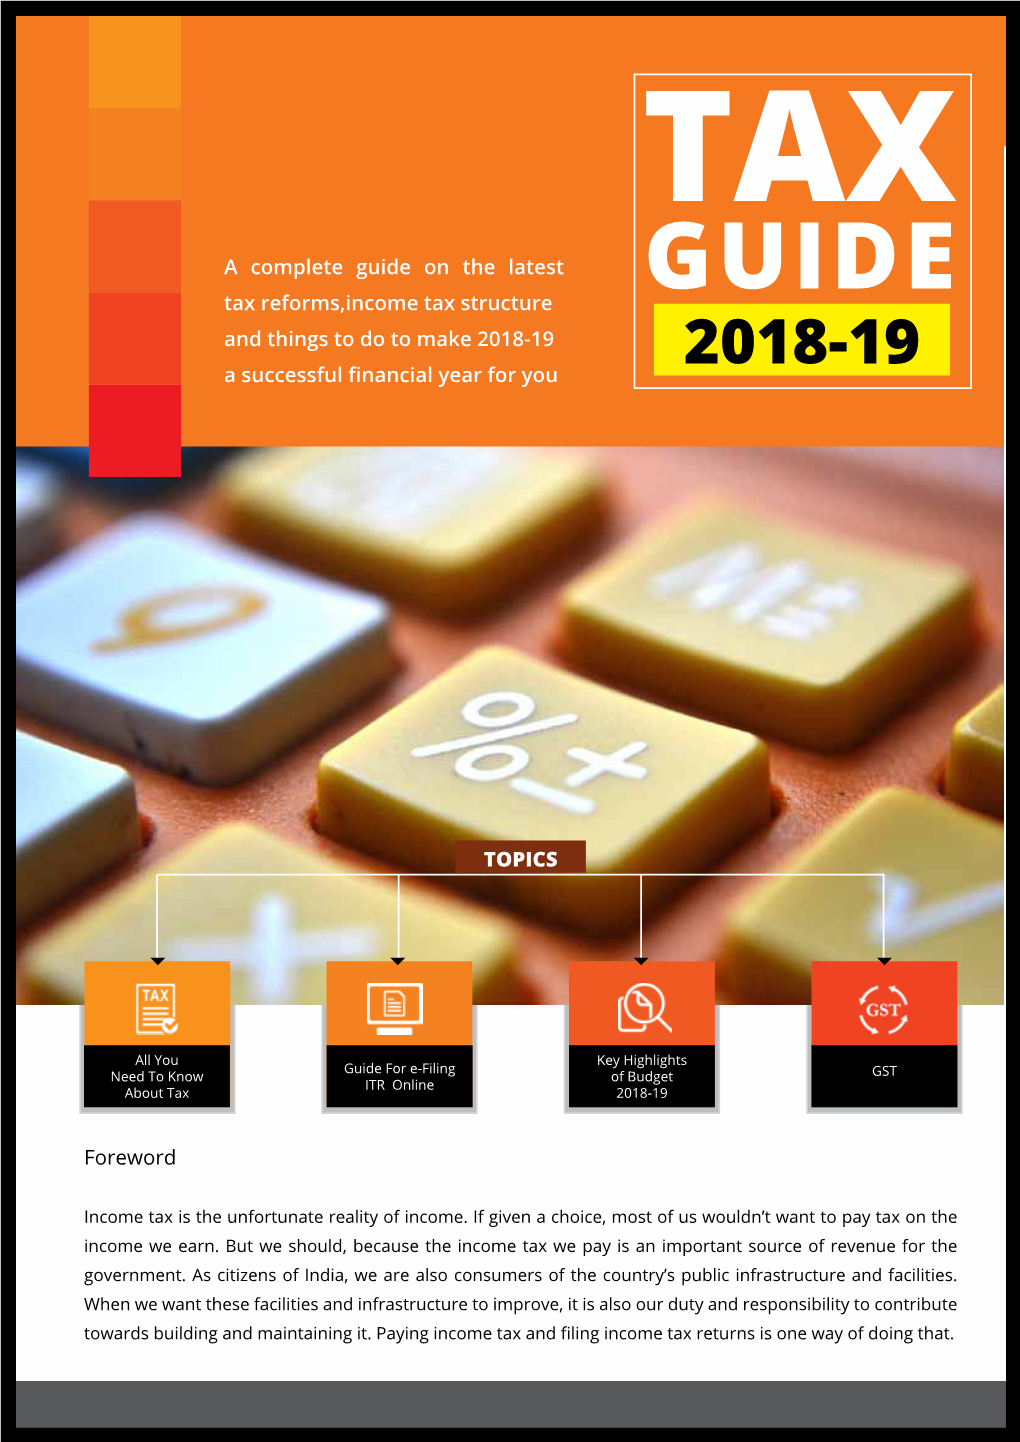 A Complete Guide on the Latest Tax Reforms,Income Tax Structure and Things to Do to Make 2018-19 a Successful Financial Year